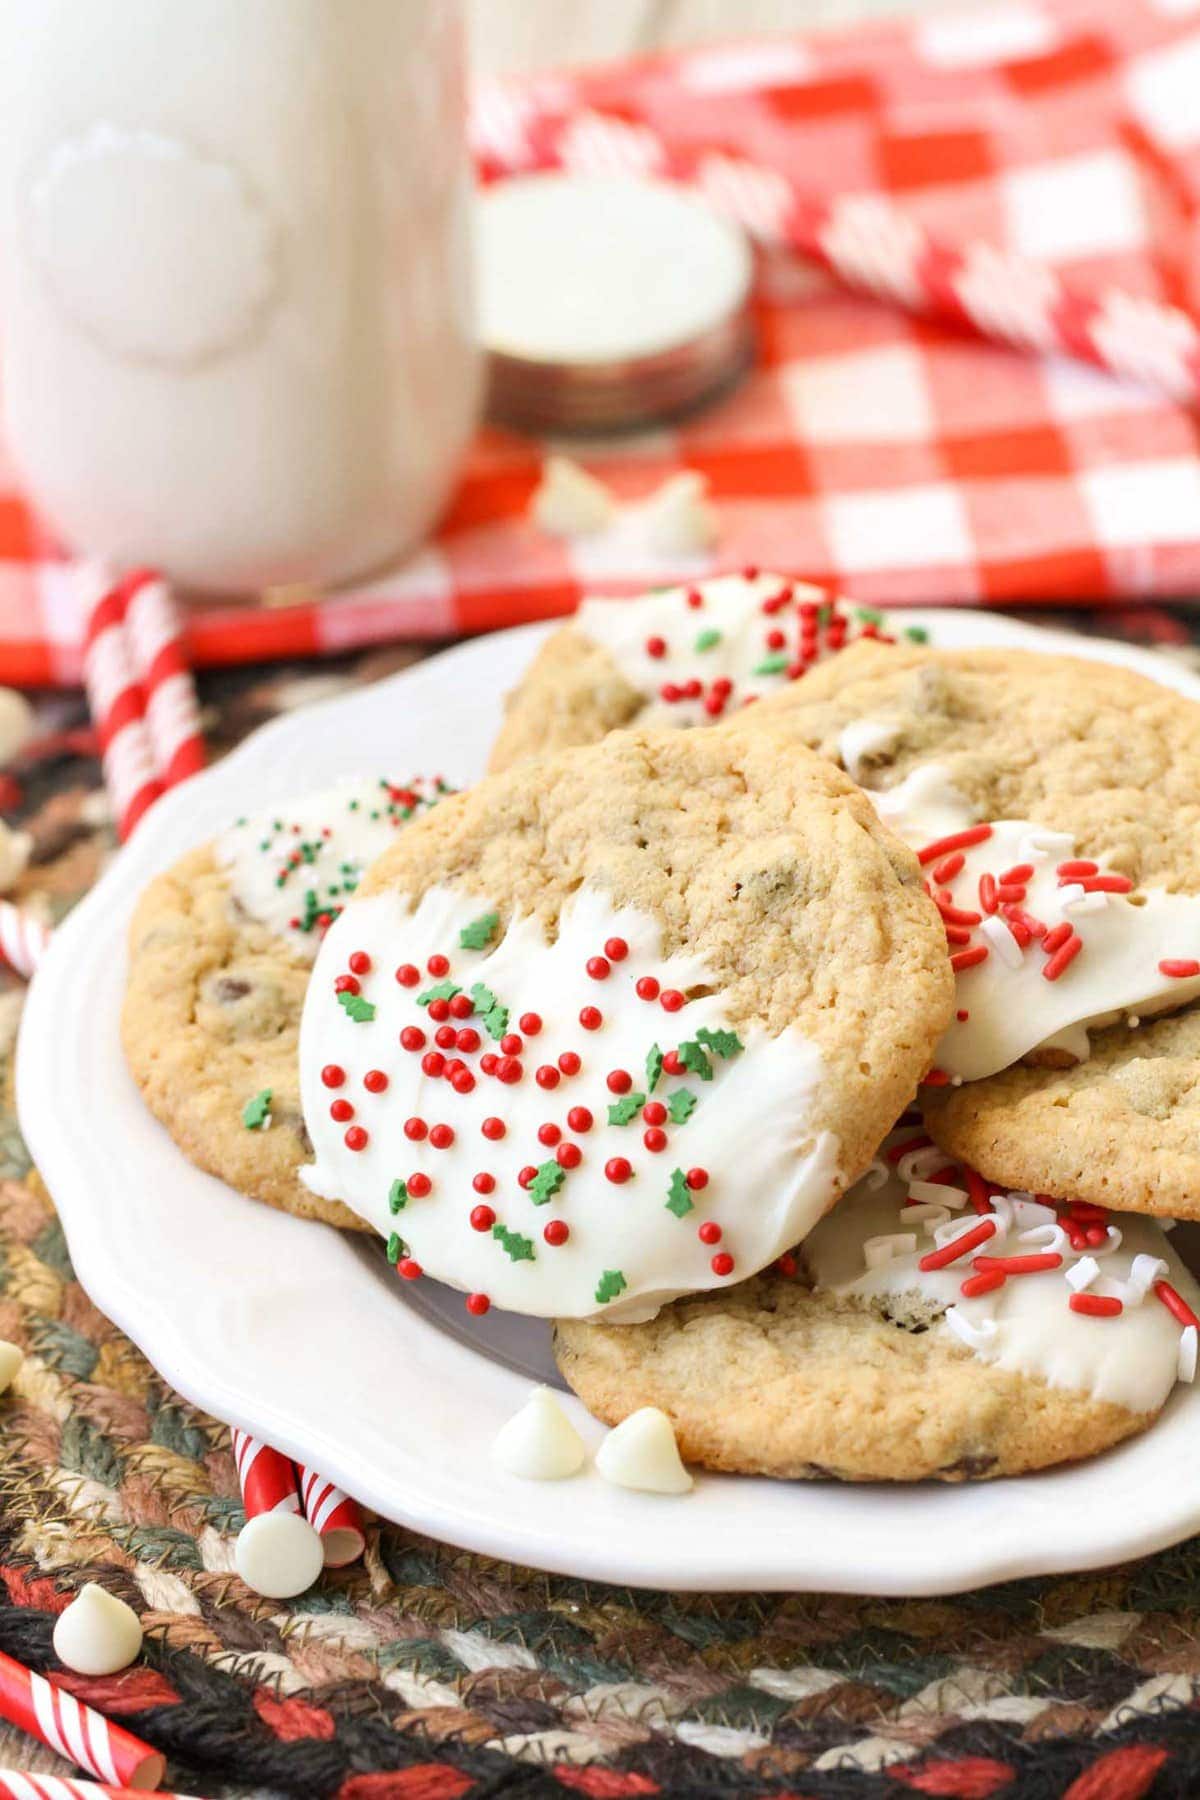 Christmas chocolate chip cookies dipped in candy coating